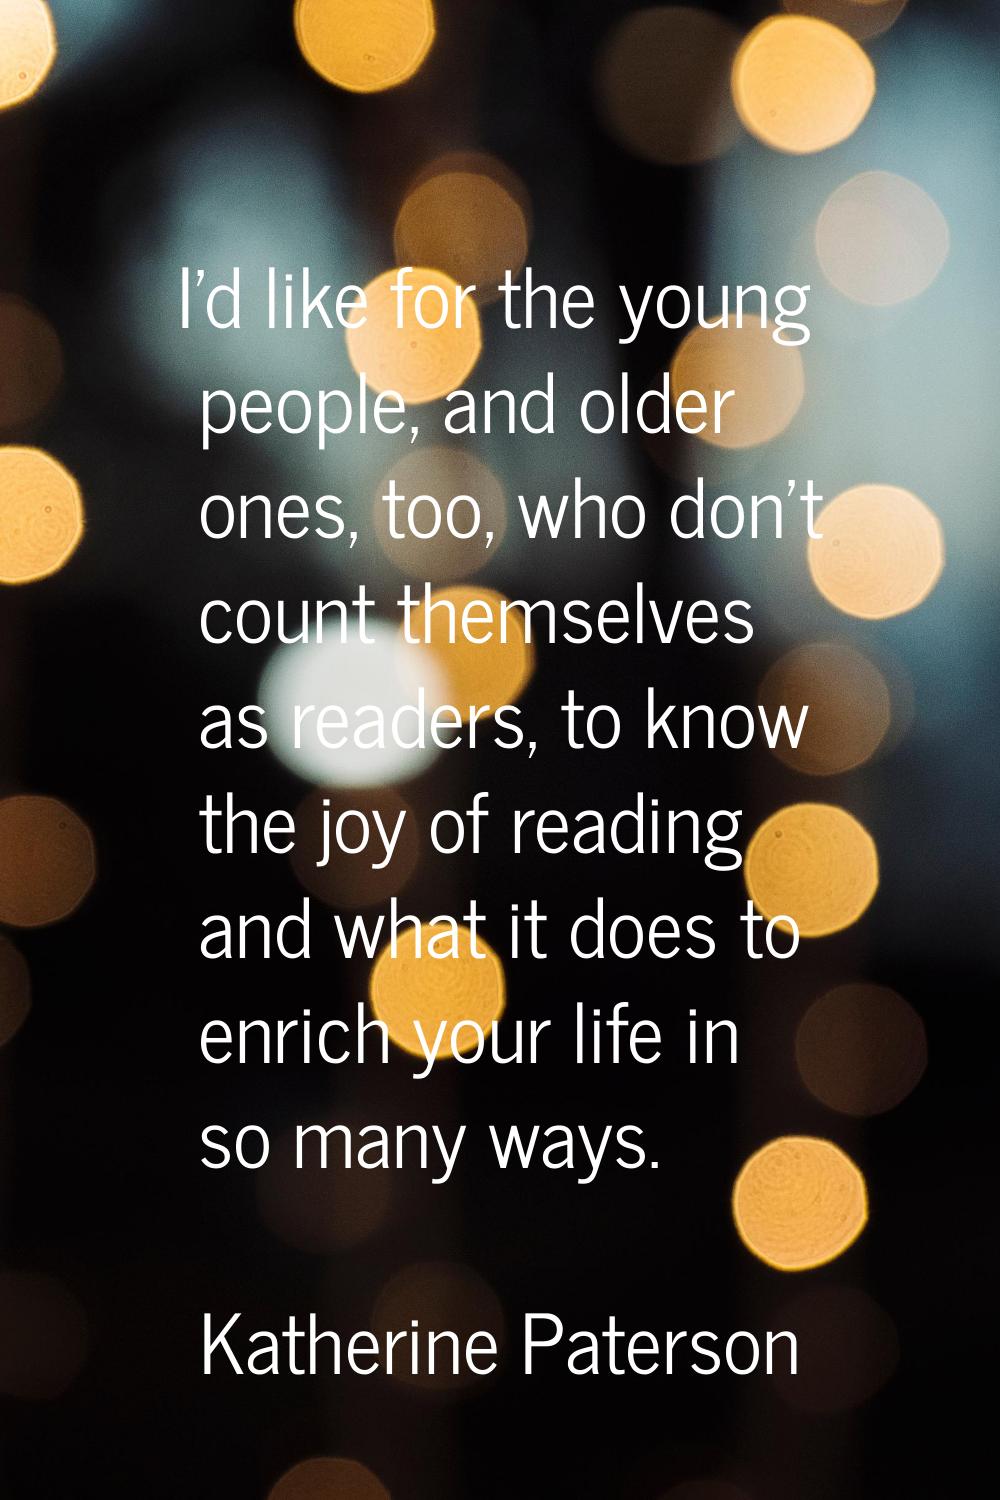 I'd like for the young people, and older ones, too, who don't count themselves as readers, to know 